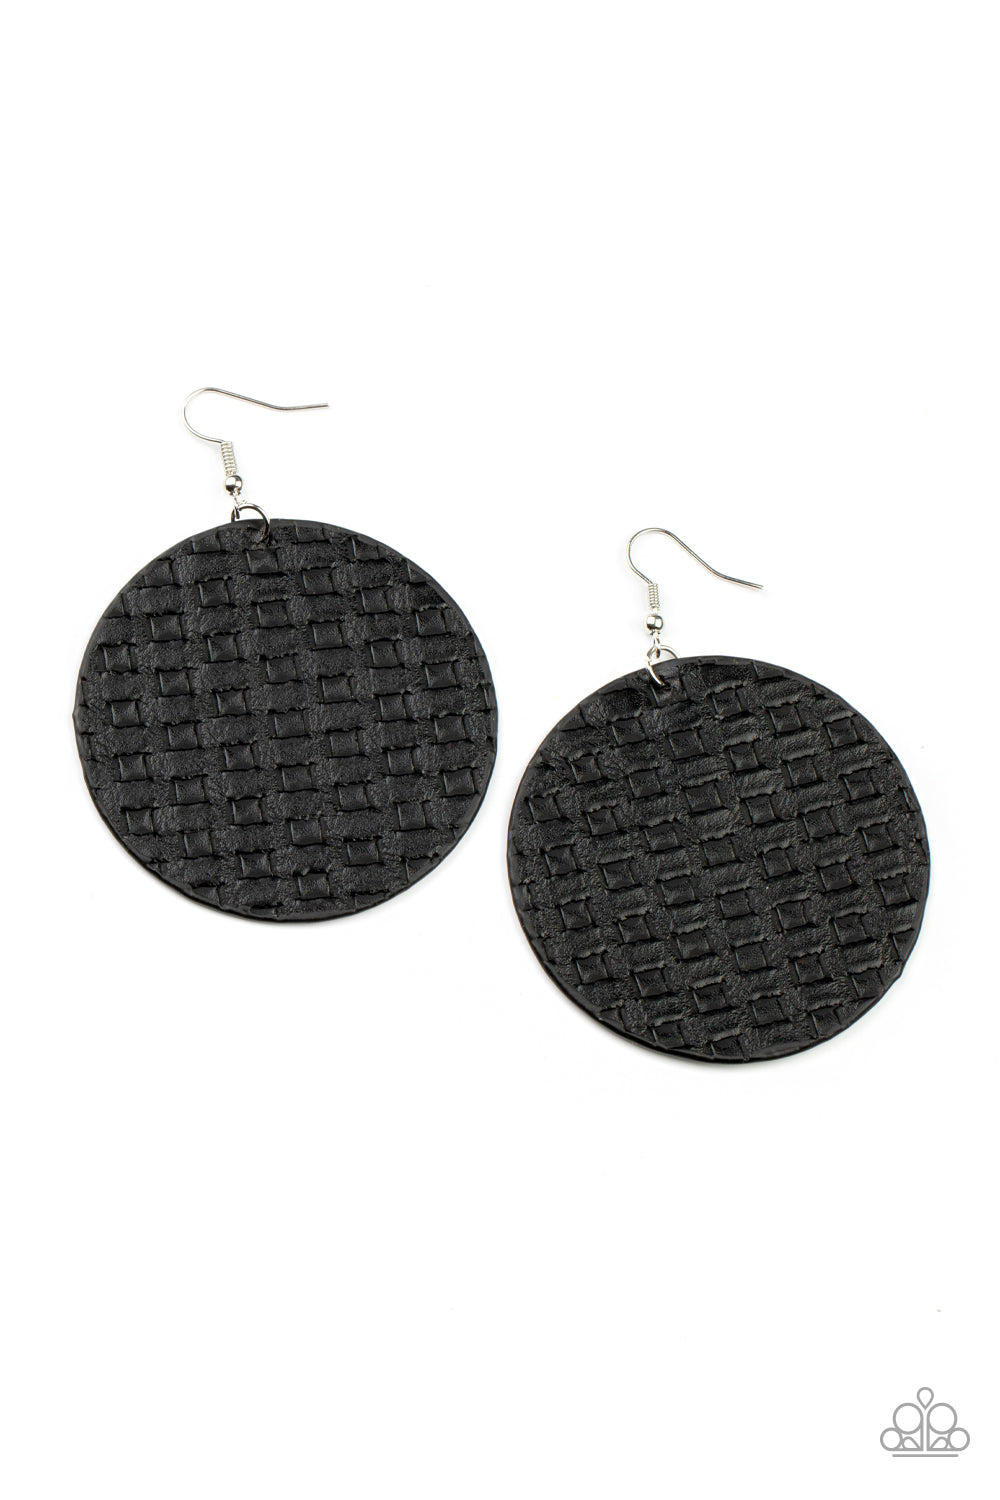 WEAVE Me Out Of It Paparazzi Accessories Earrings